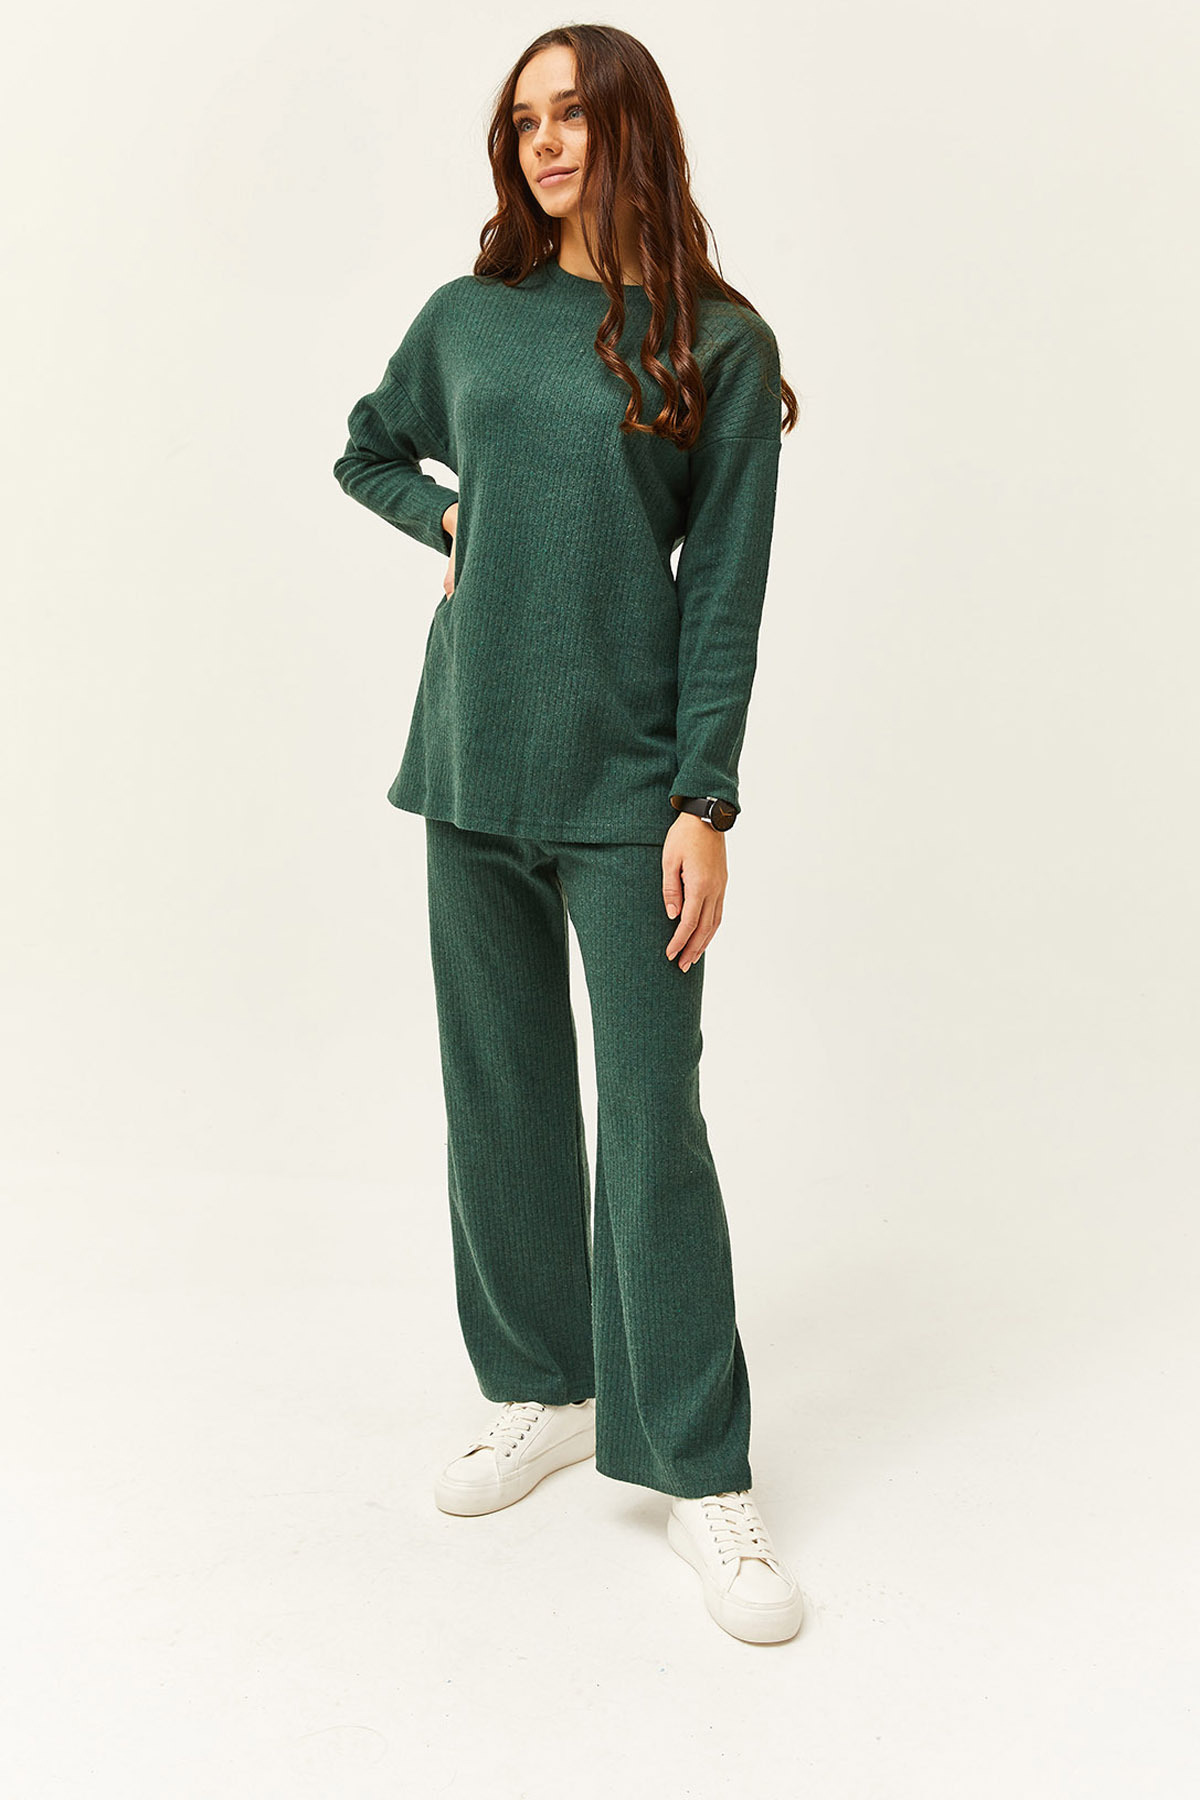 Olalook Women's Emerald Green Bottom Top and Ribbed Thick Suit